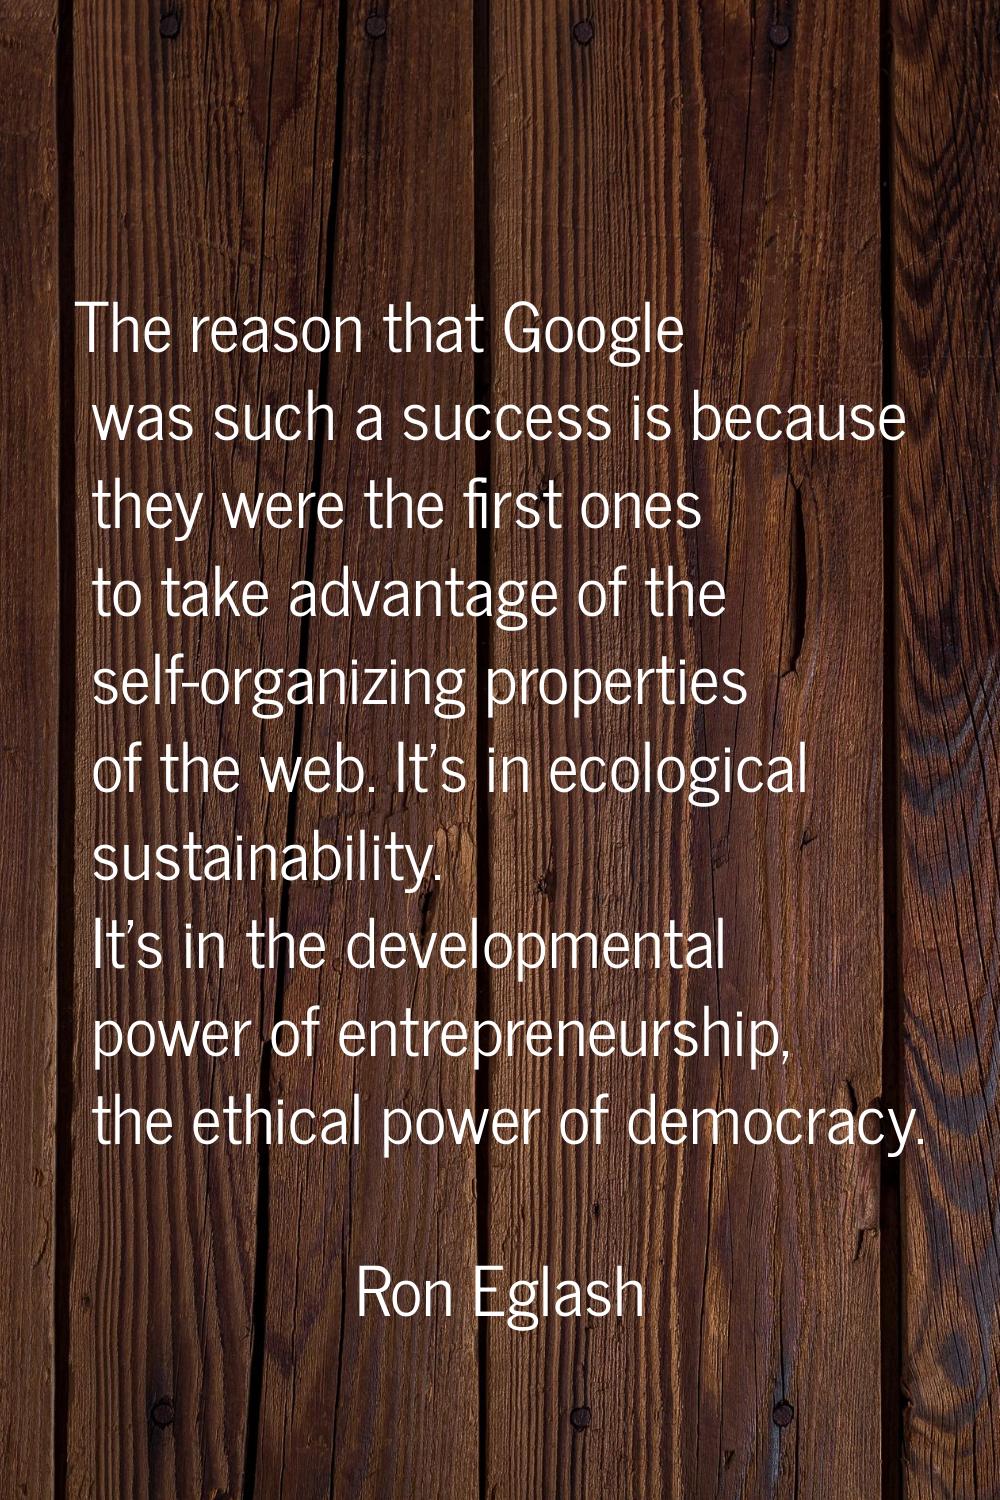 The reason that Google was such a success is because they were the first ones to take advantage of 